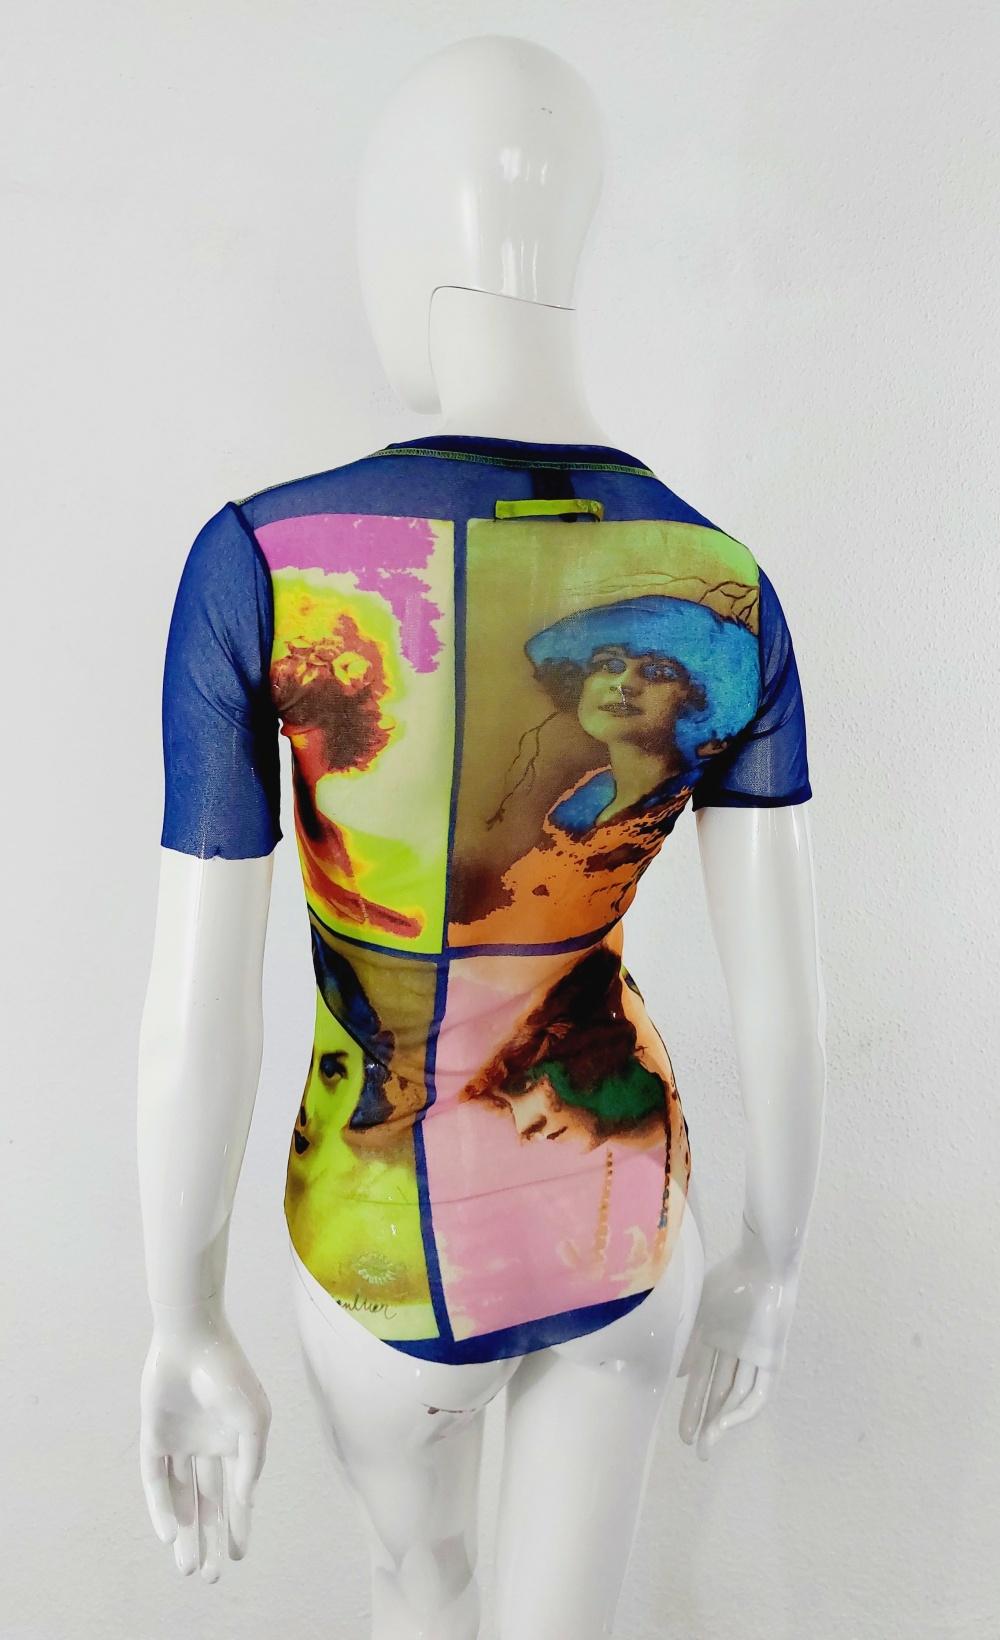 Jean Paul Gaultier Kylie Jenner Kim Mesh Portrait Saturated Faces Top Shirt Tee For Sale 2